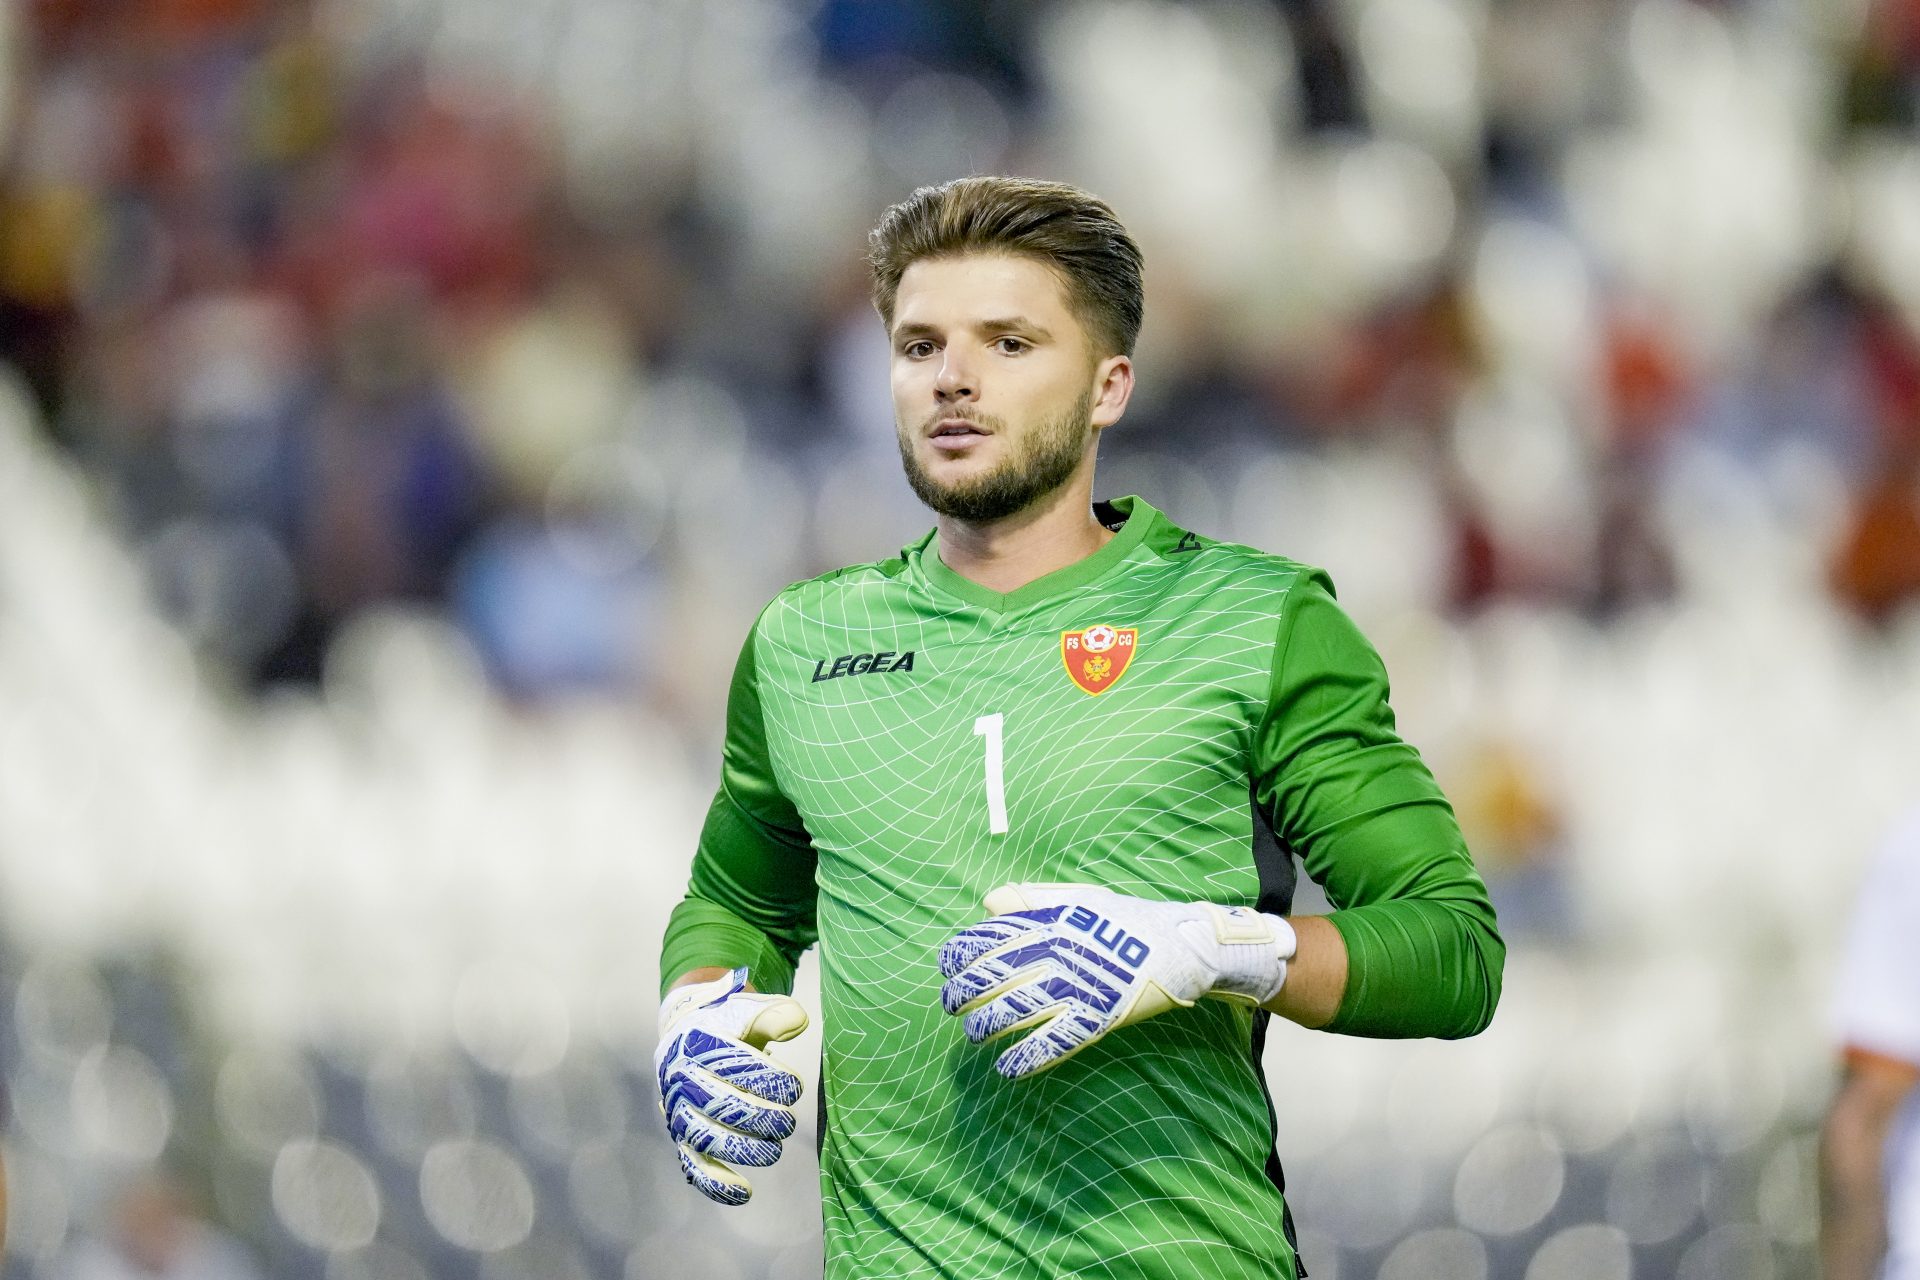 Millwall and Montenegro goalkeeper dies unexpectedly at 26